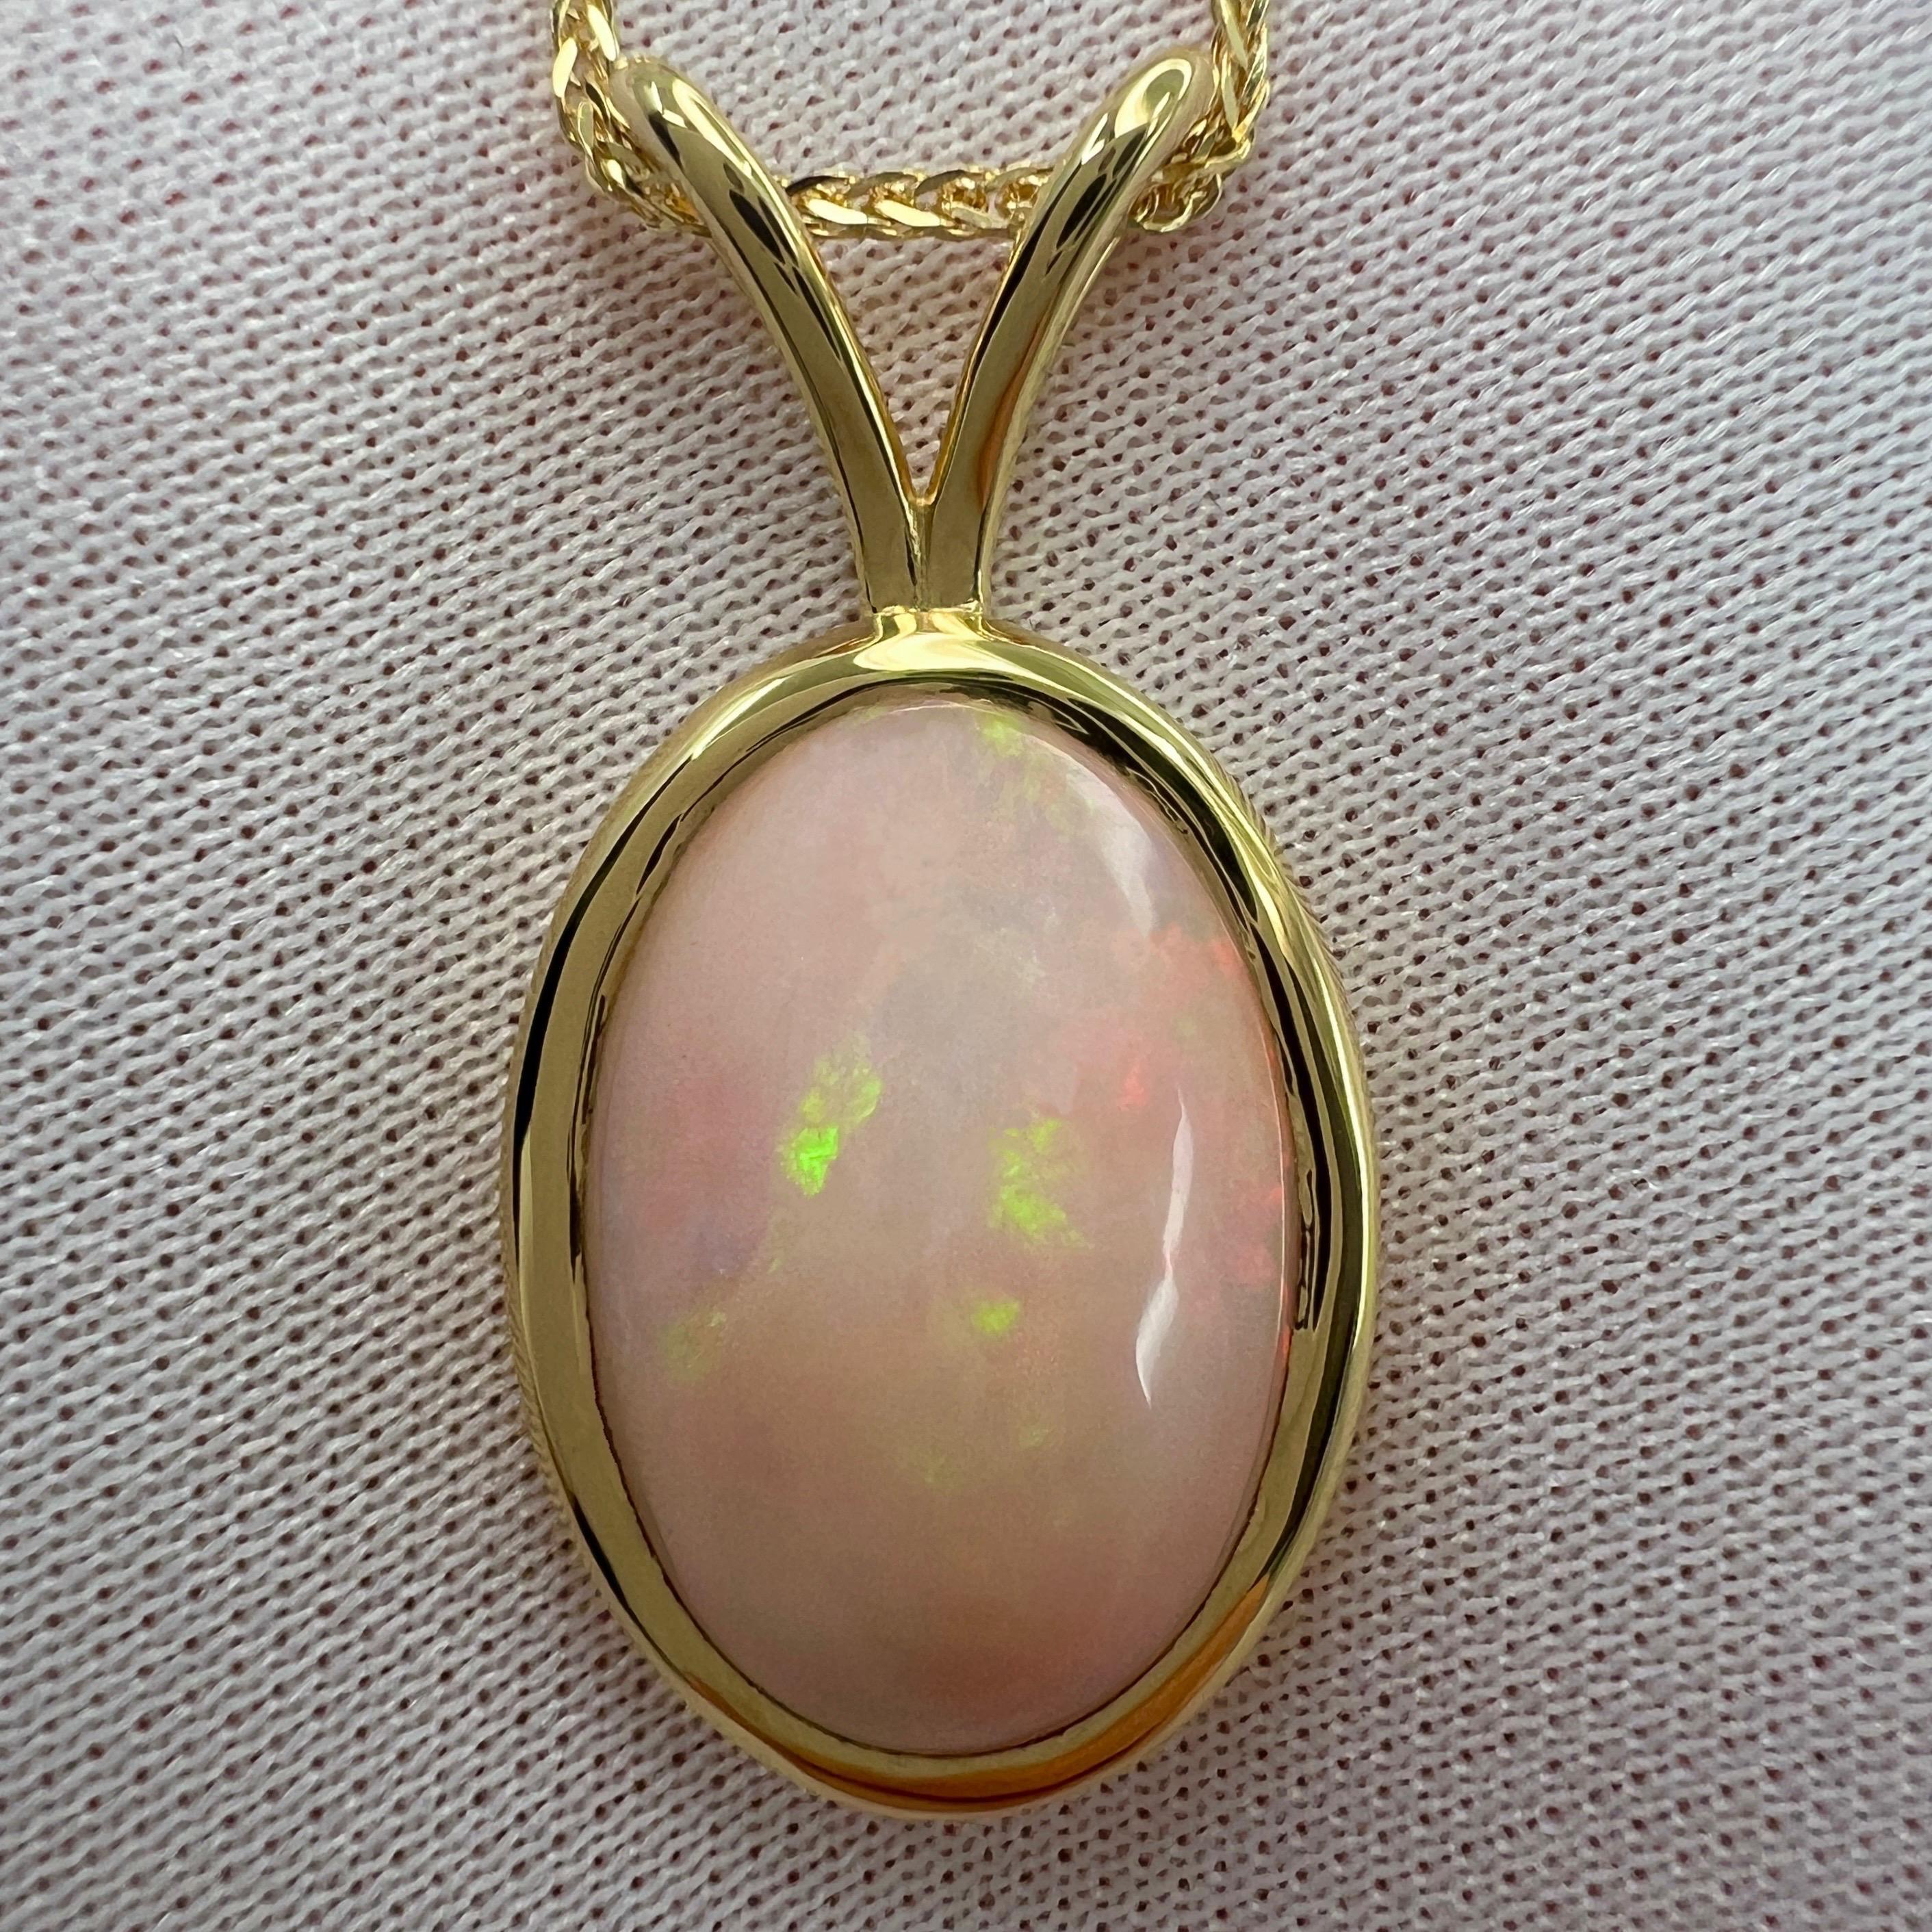 6.15ct Fine White Opal Oval Cabochon 18k Yellow Gold Bezel Pendant Necklace For Sale 3